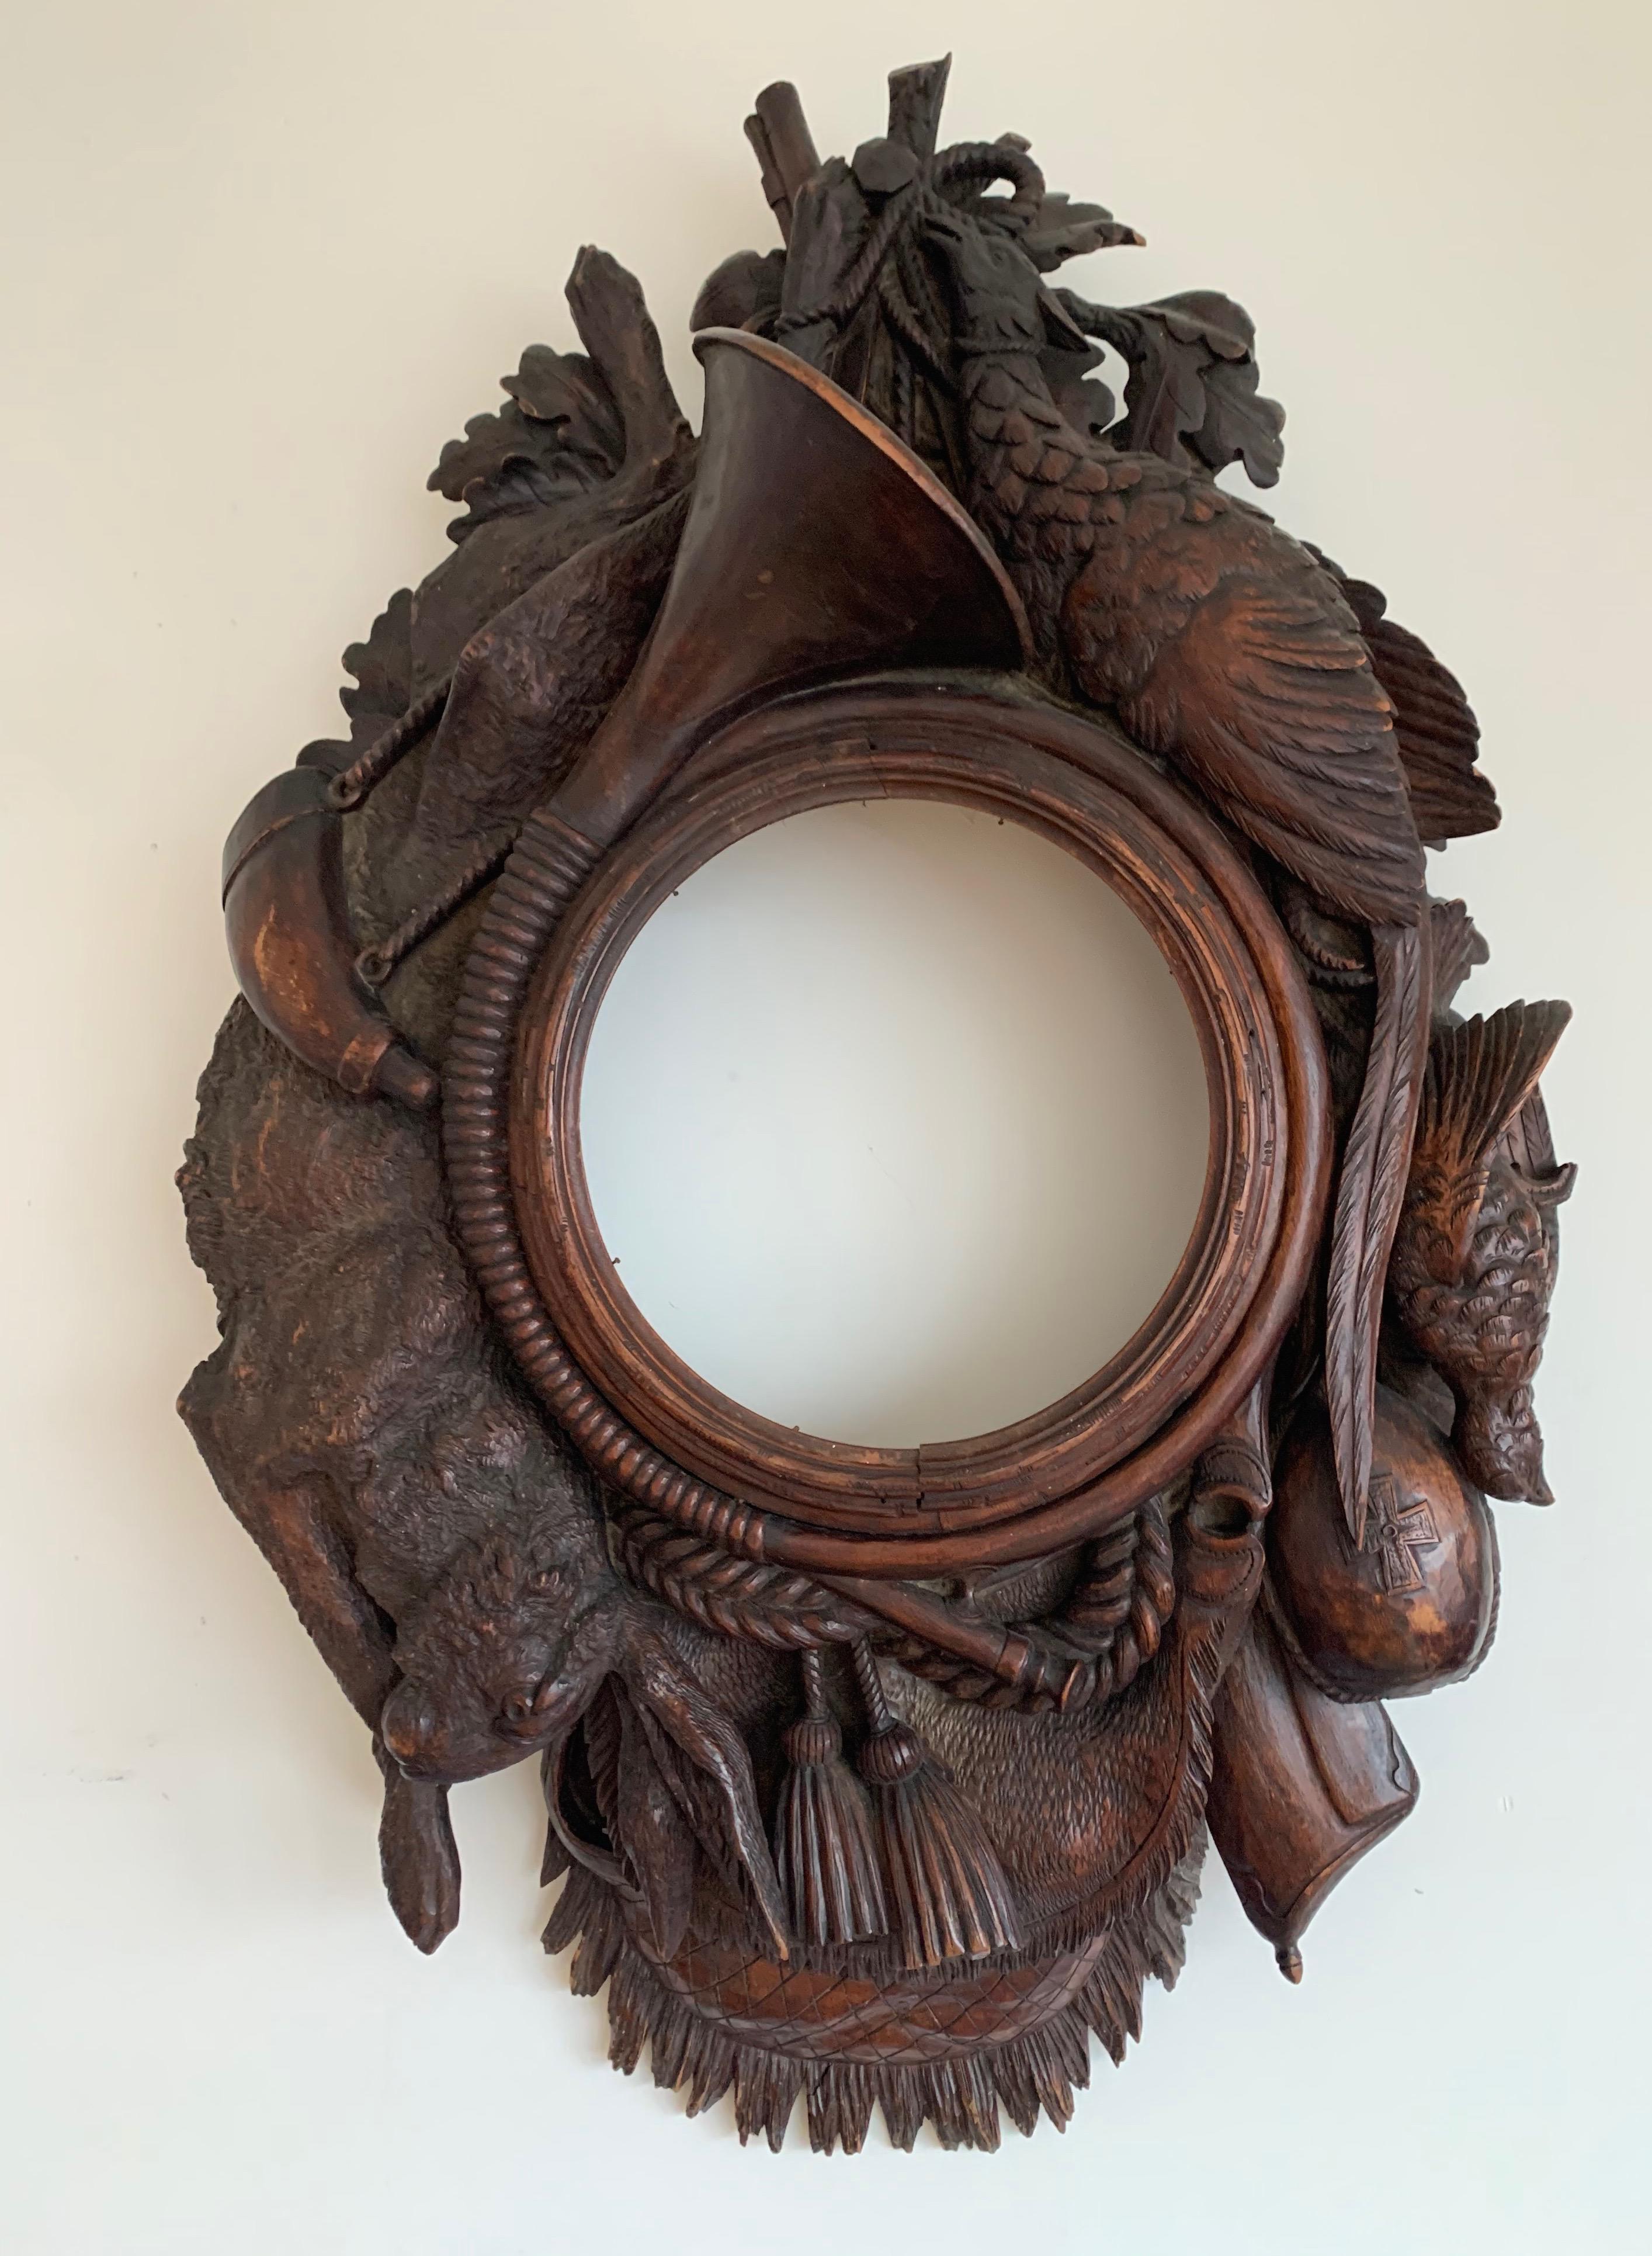 Incredible size and great quality black forest hunting plaque for wall mounting.

This rare size and all hand-carved, solid nutwood game plaque from the second half of the 19th century is of amazing quality and beauty. If you look at the back (in